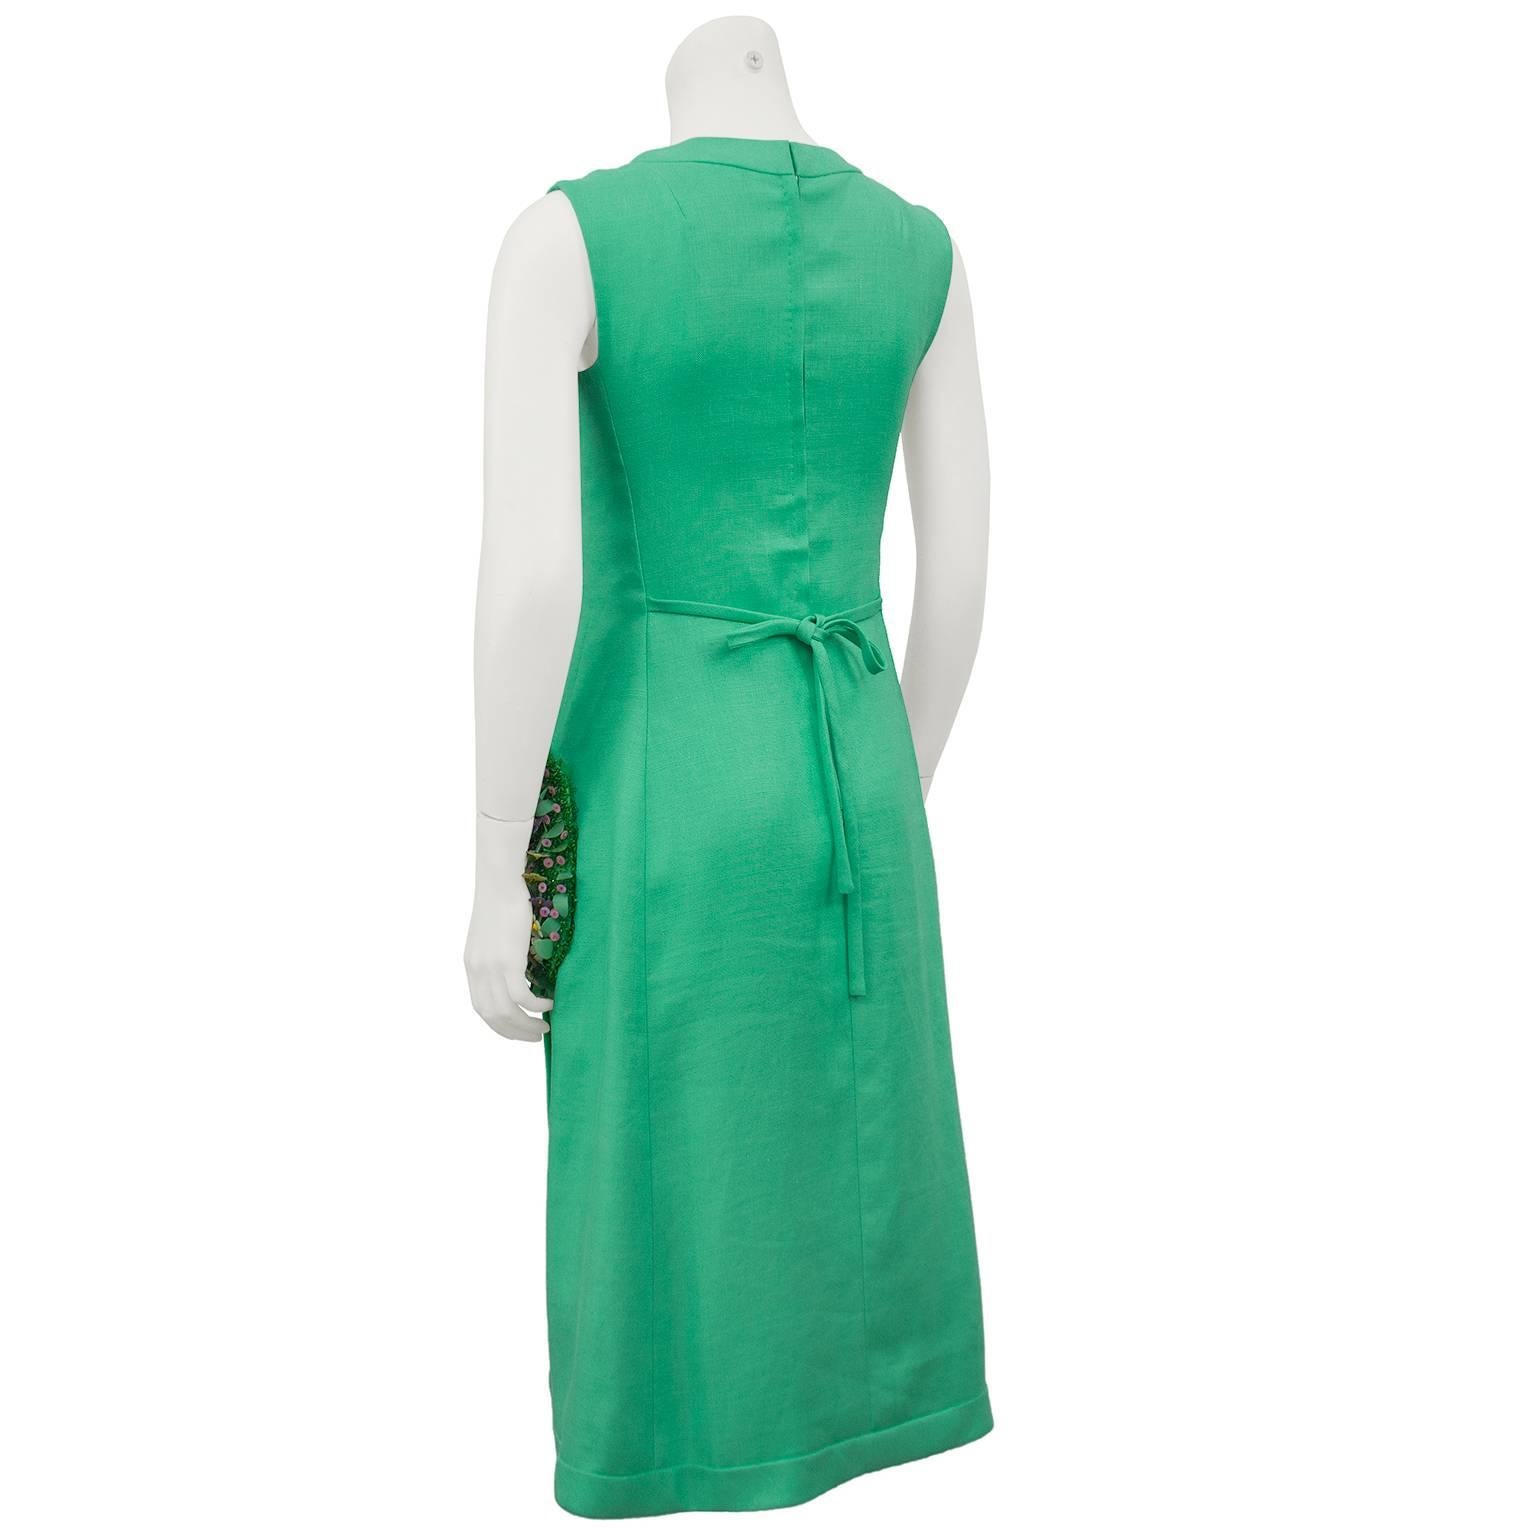 Maggy Reeves Couture Green Dress with Embellished Pocket and Handbag, 1960s  In Excellent Condition For Sale In Toronto, Ontario